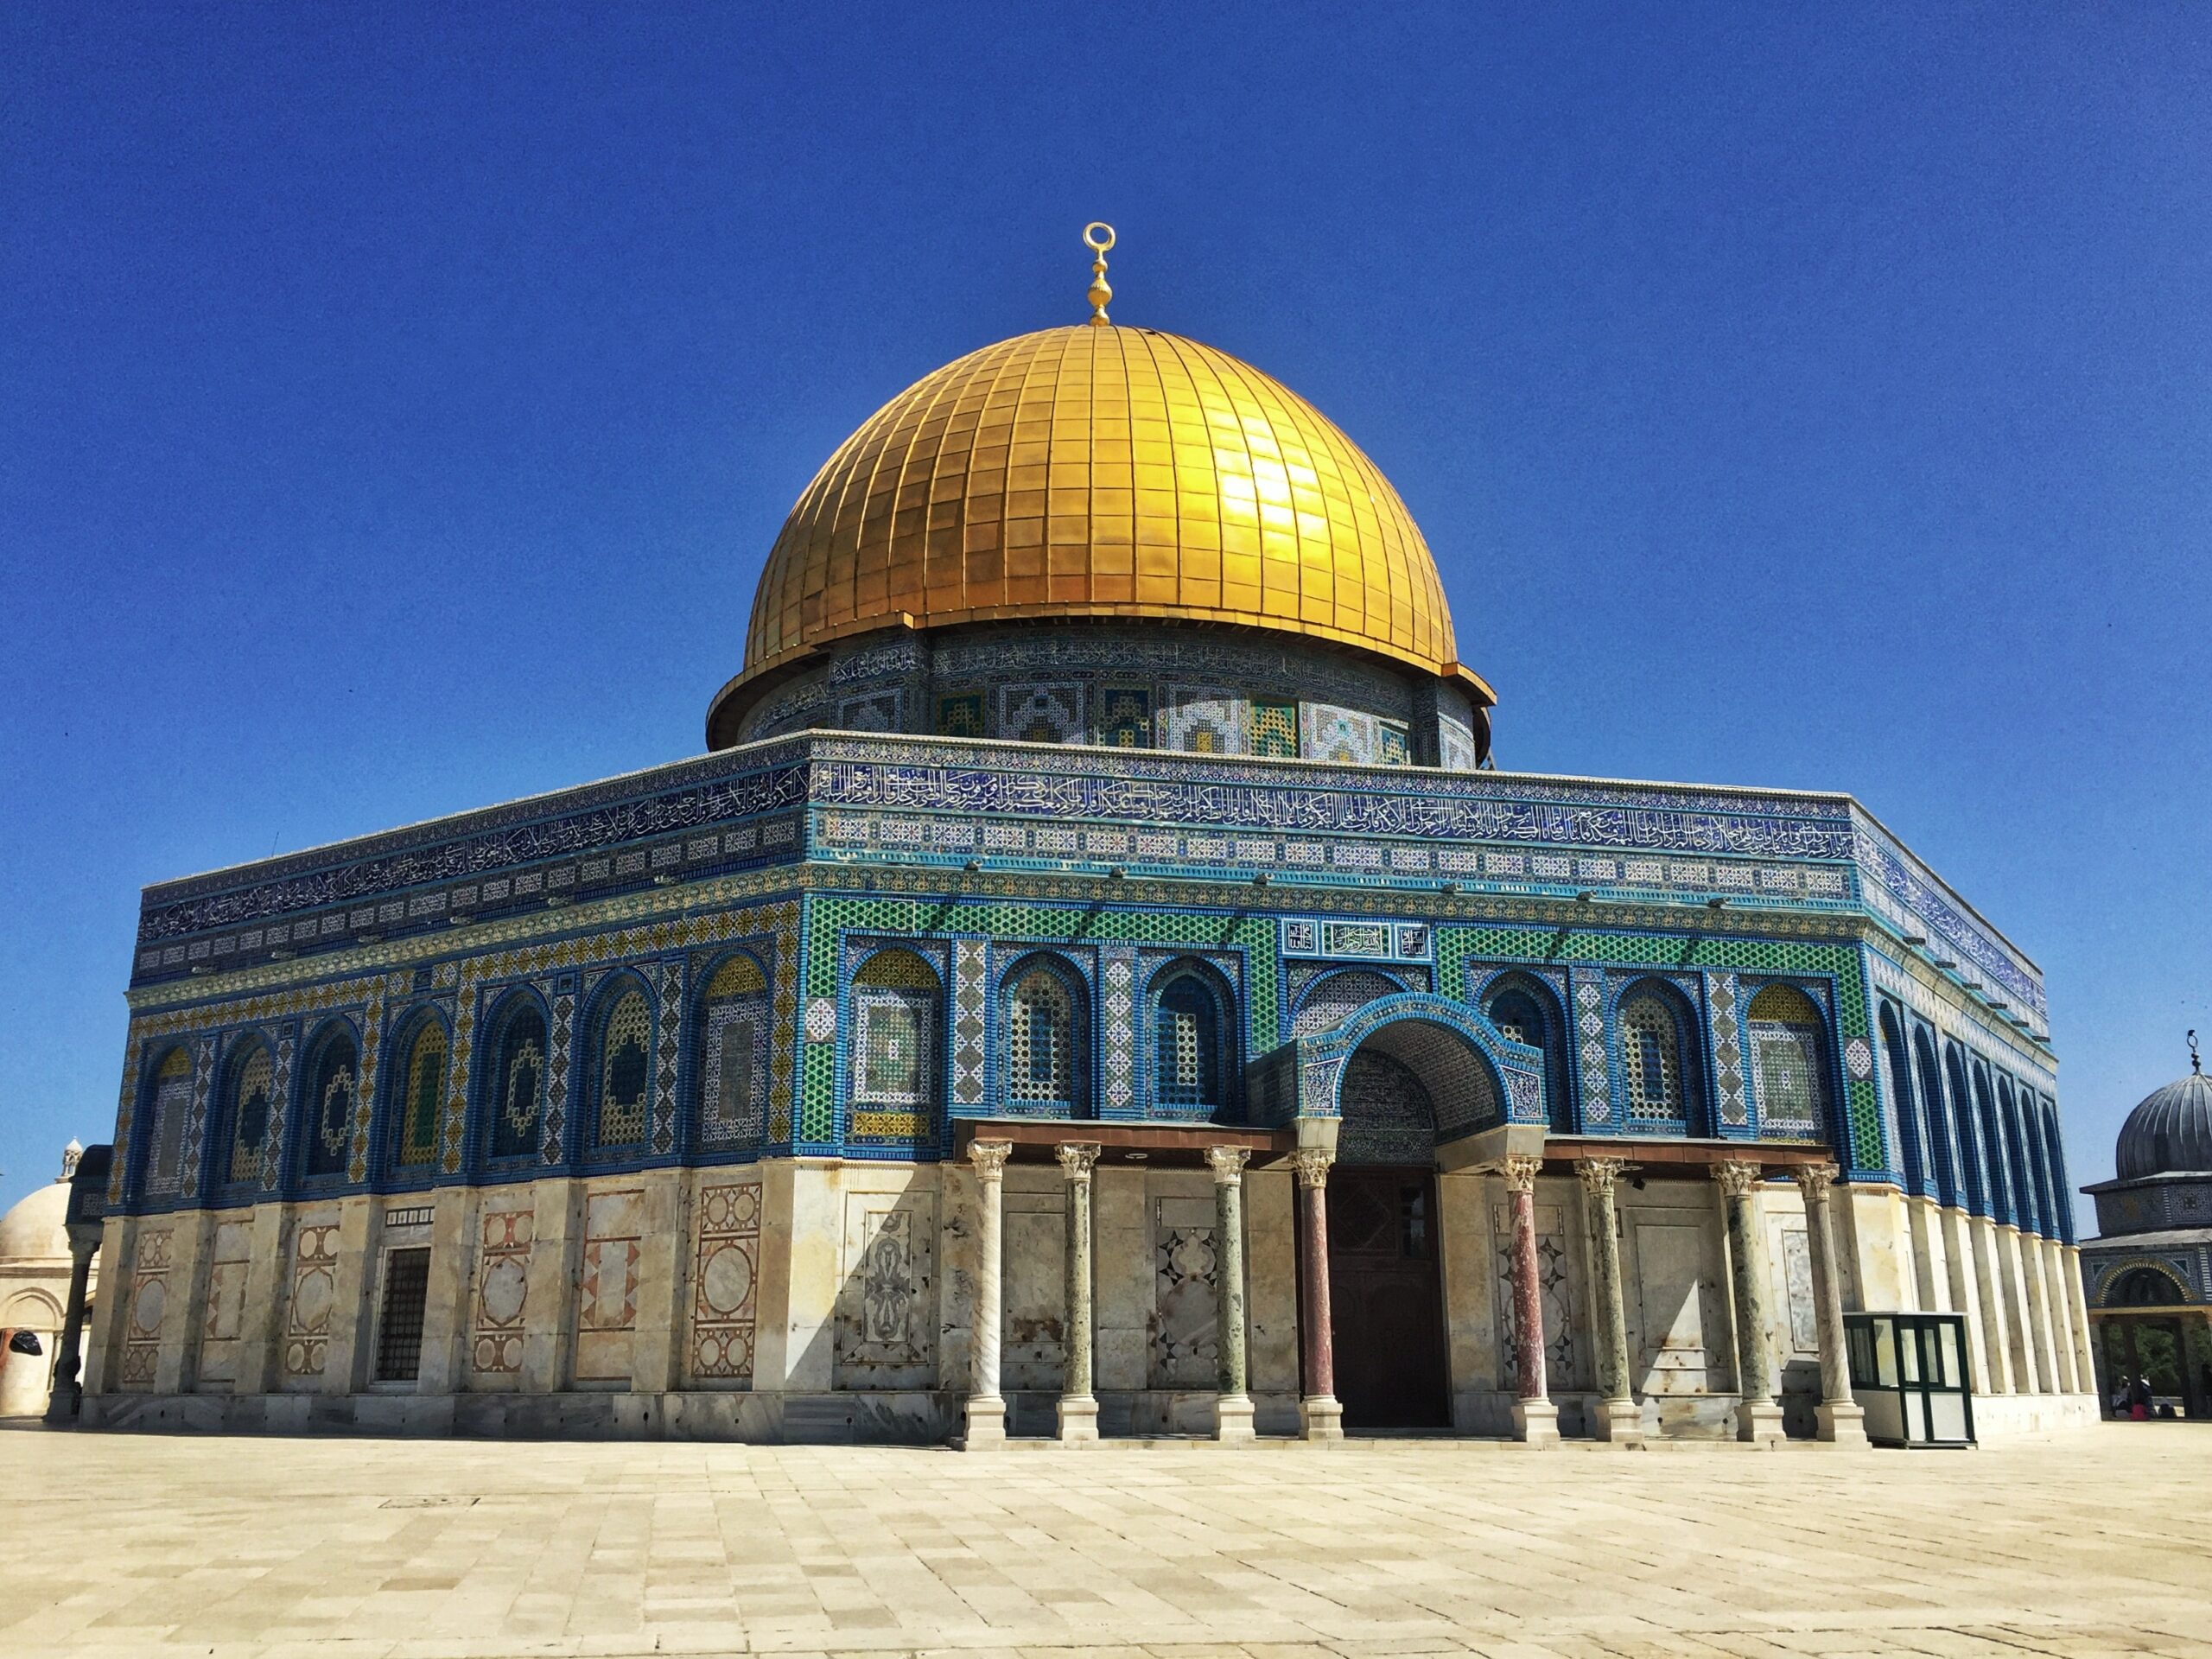 Should we be fighting over control of holy sites?